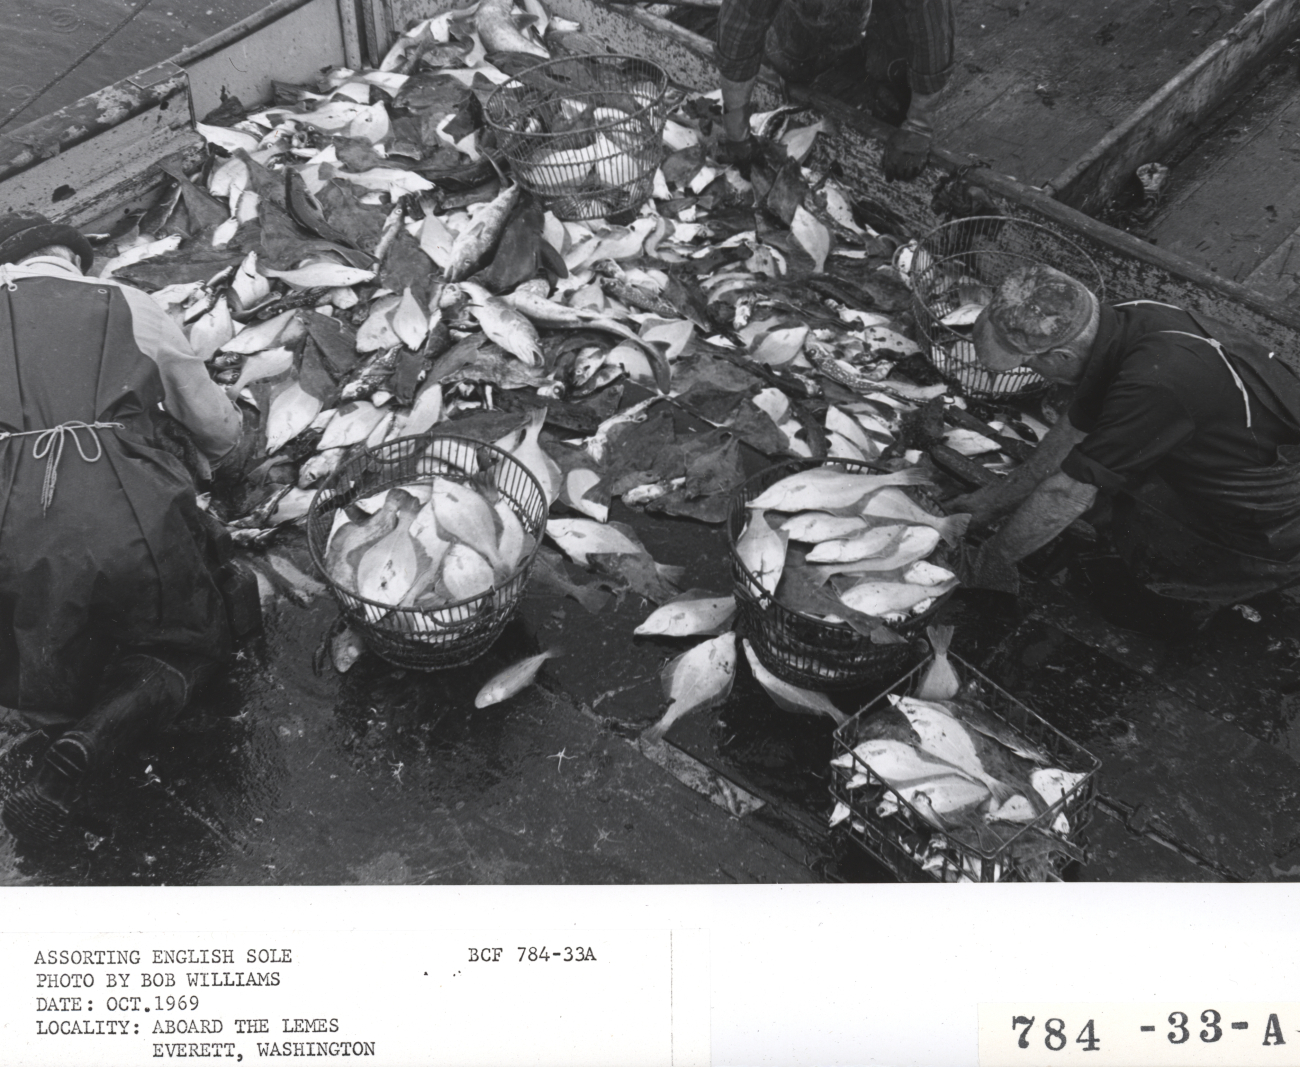 Sorting English sole aboard the fishing vessel LEMES